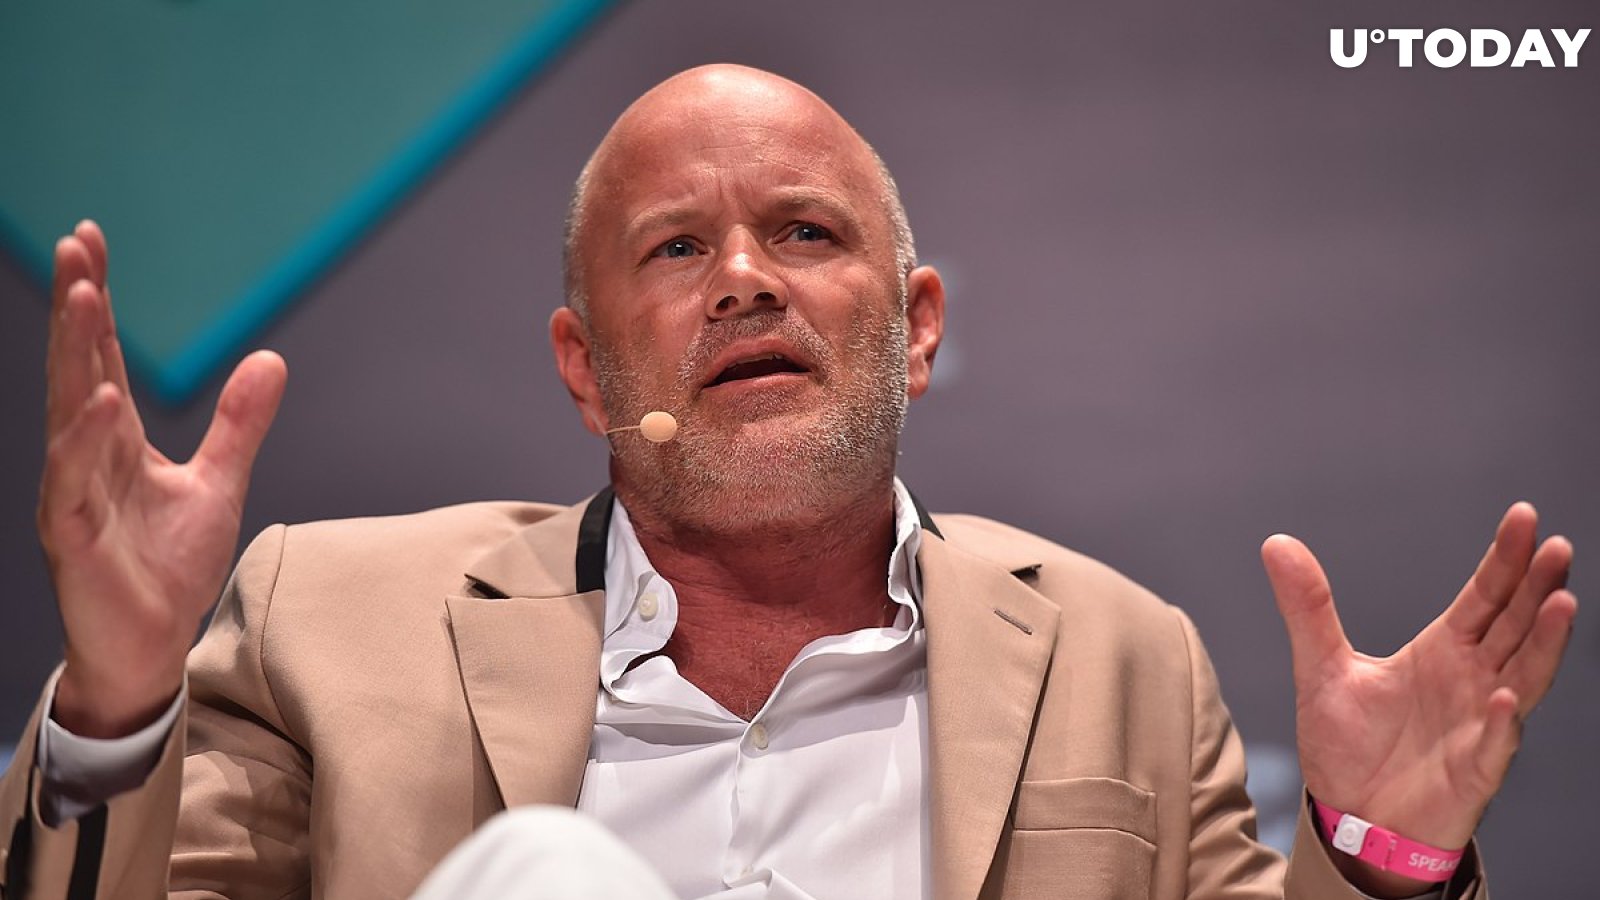 Here's When Bitcoin May Go to the Moon, According to Mike Novogratz 